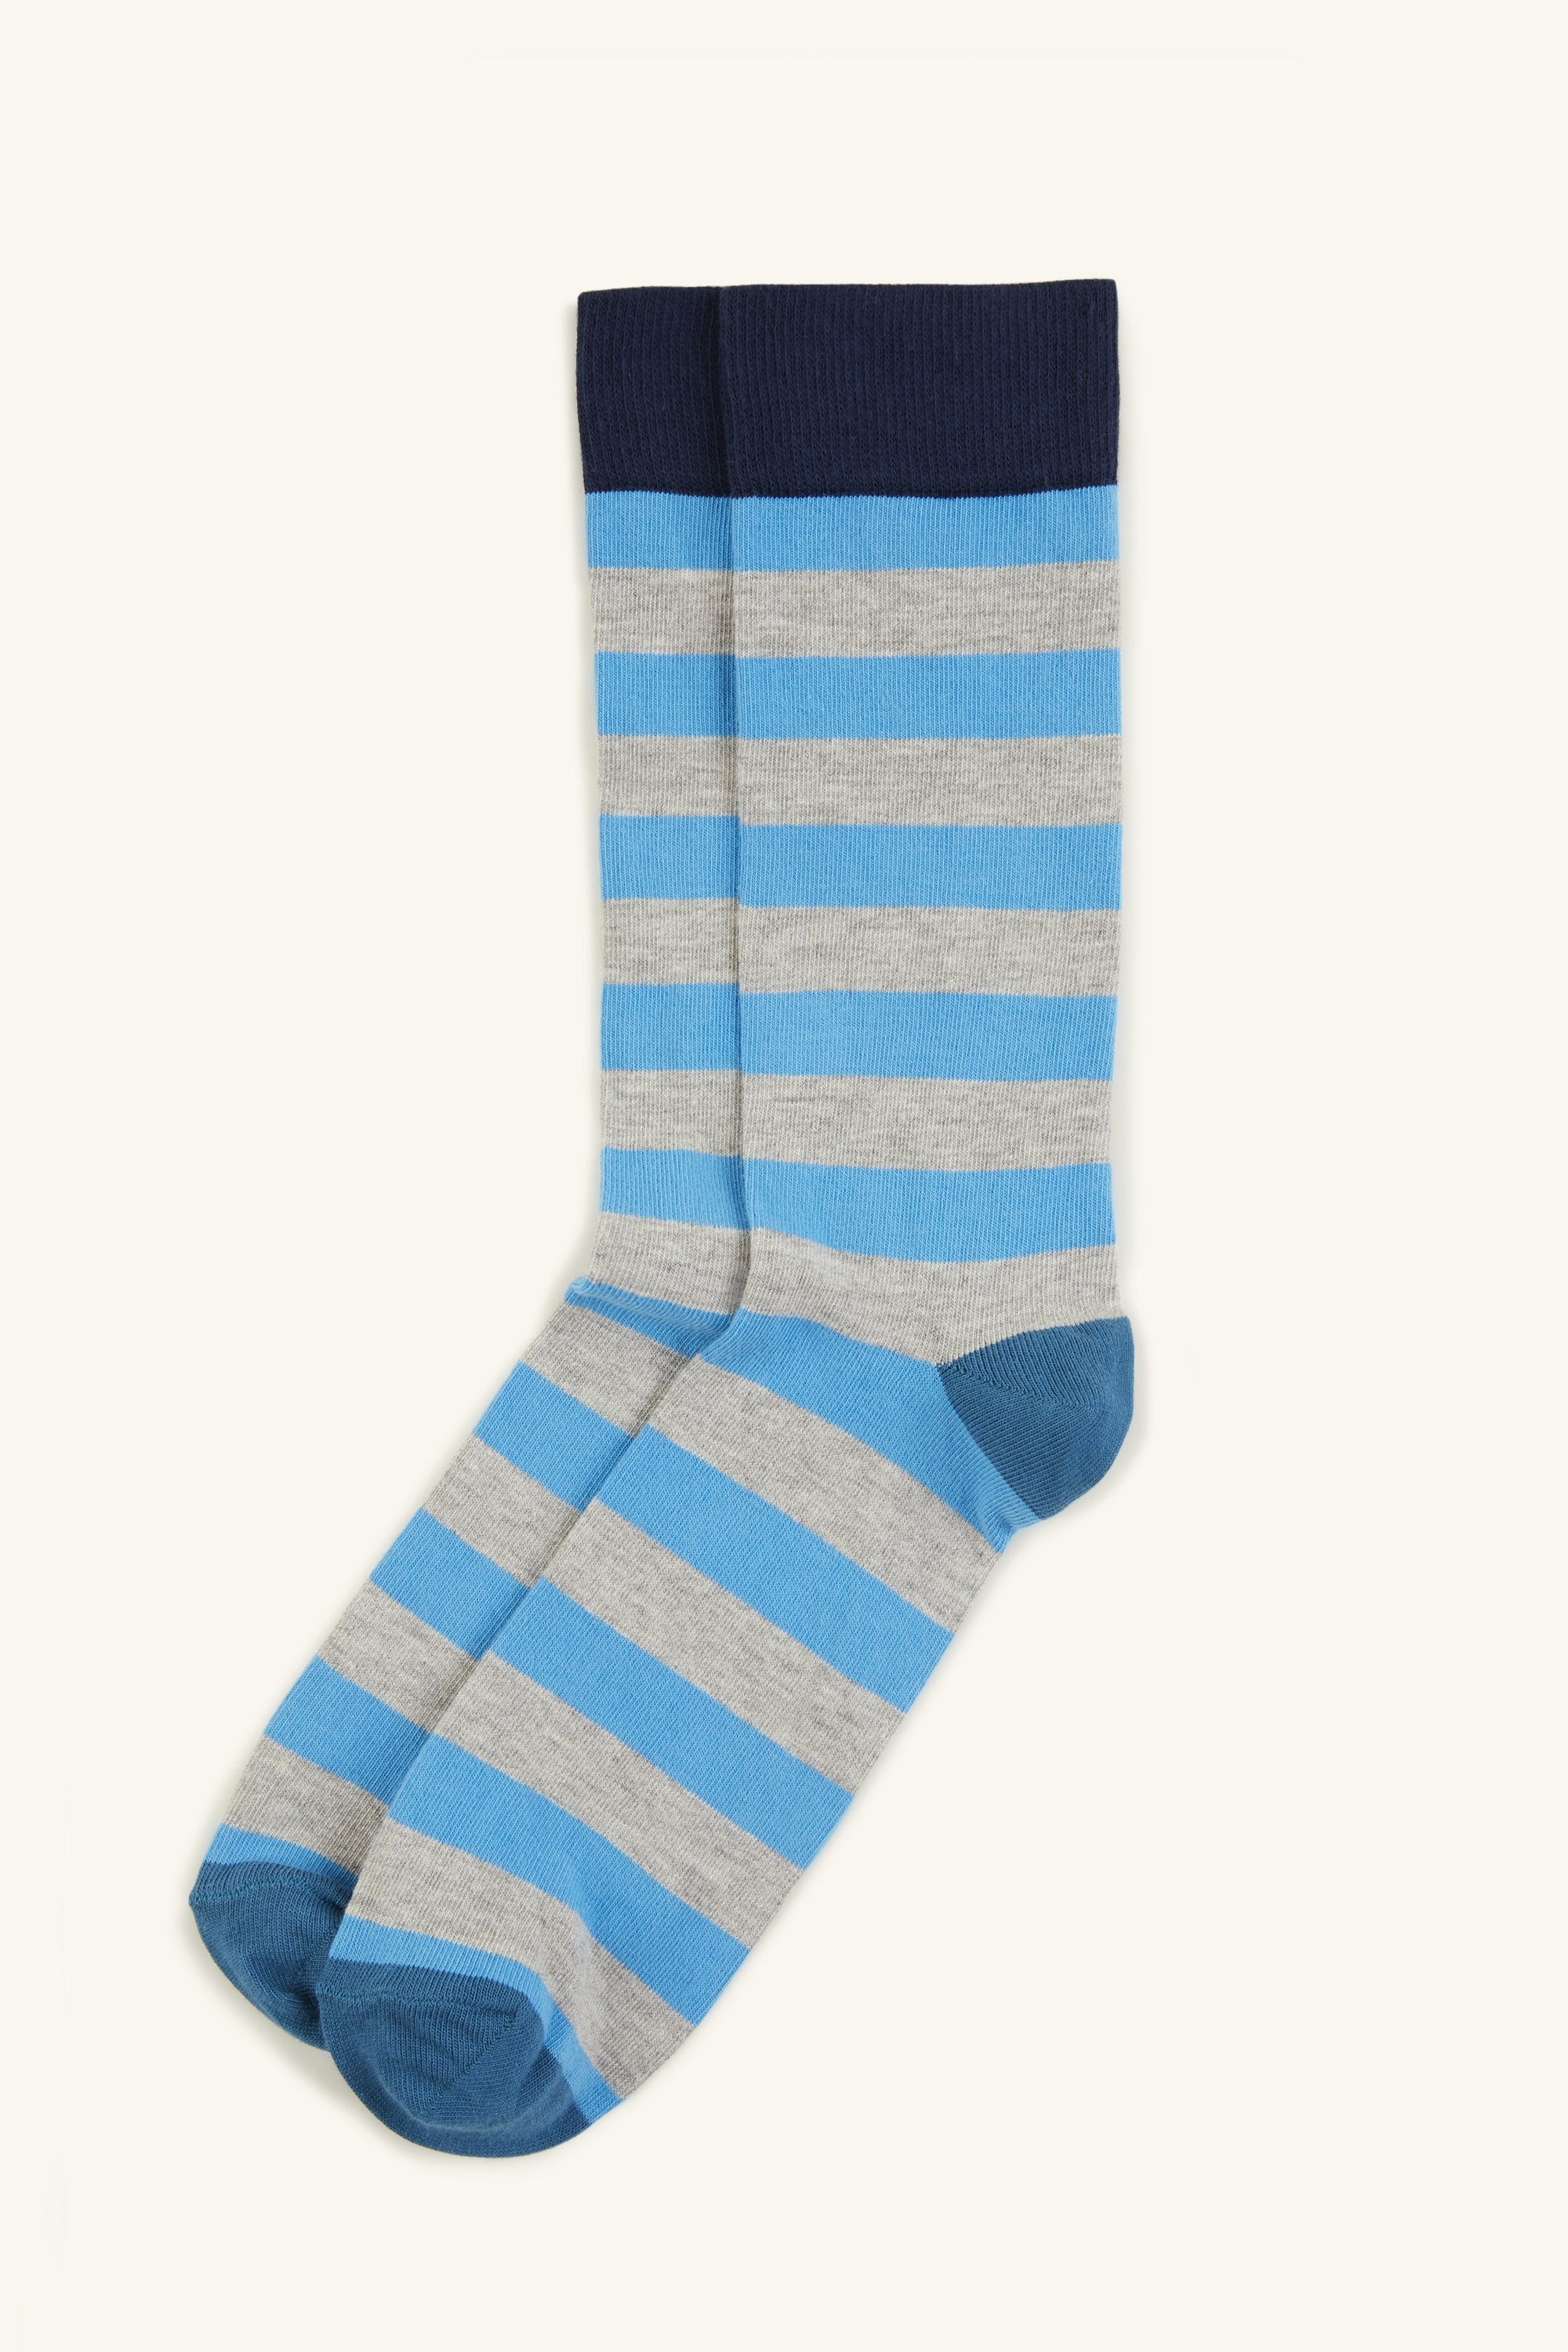 HS by Happy Socks Grey Marl with Turquoise Stripe Sock